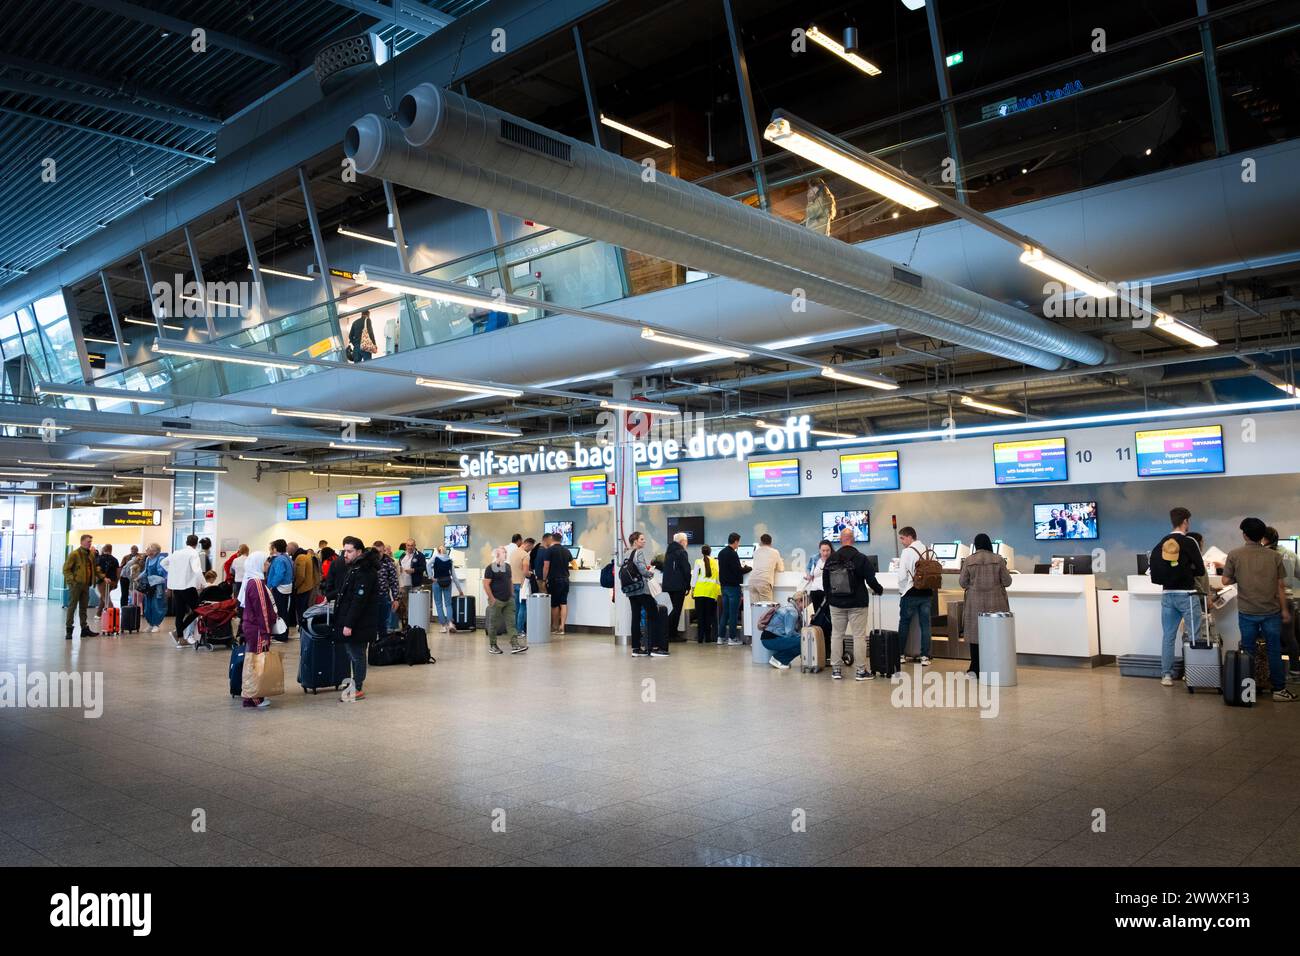 Eindhoven Airport Netherlands Passenger Terminal self service baggage drop off Stock Photo